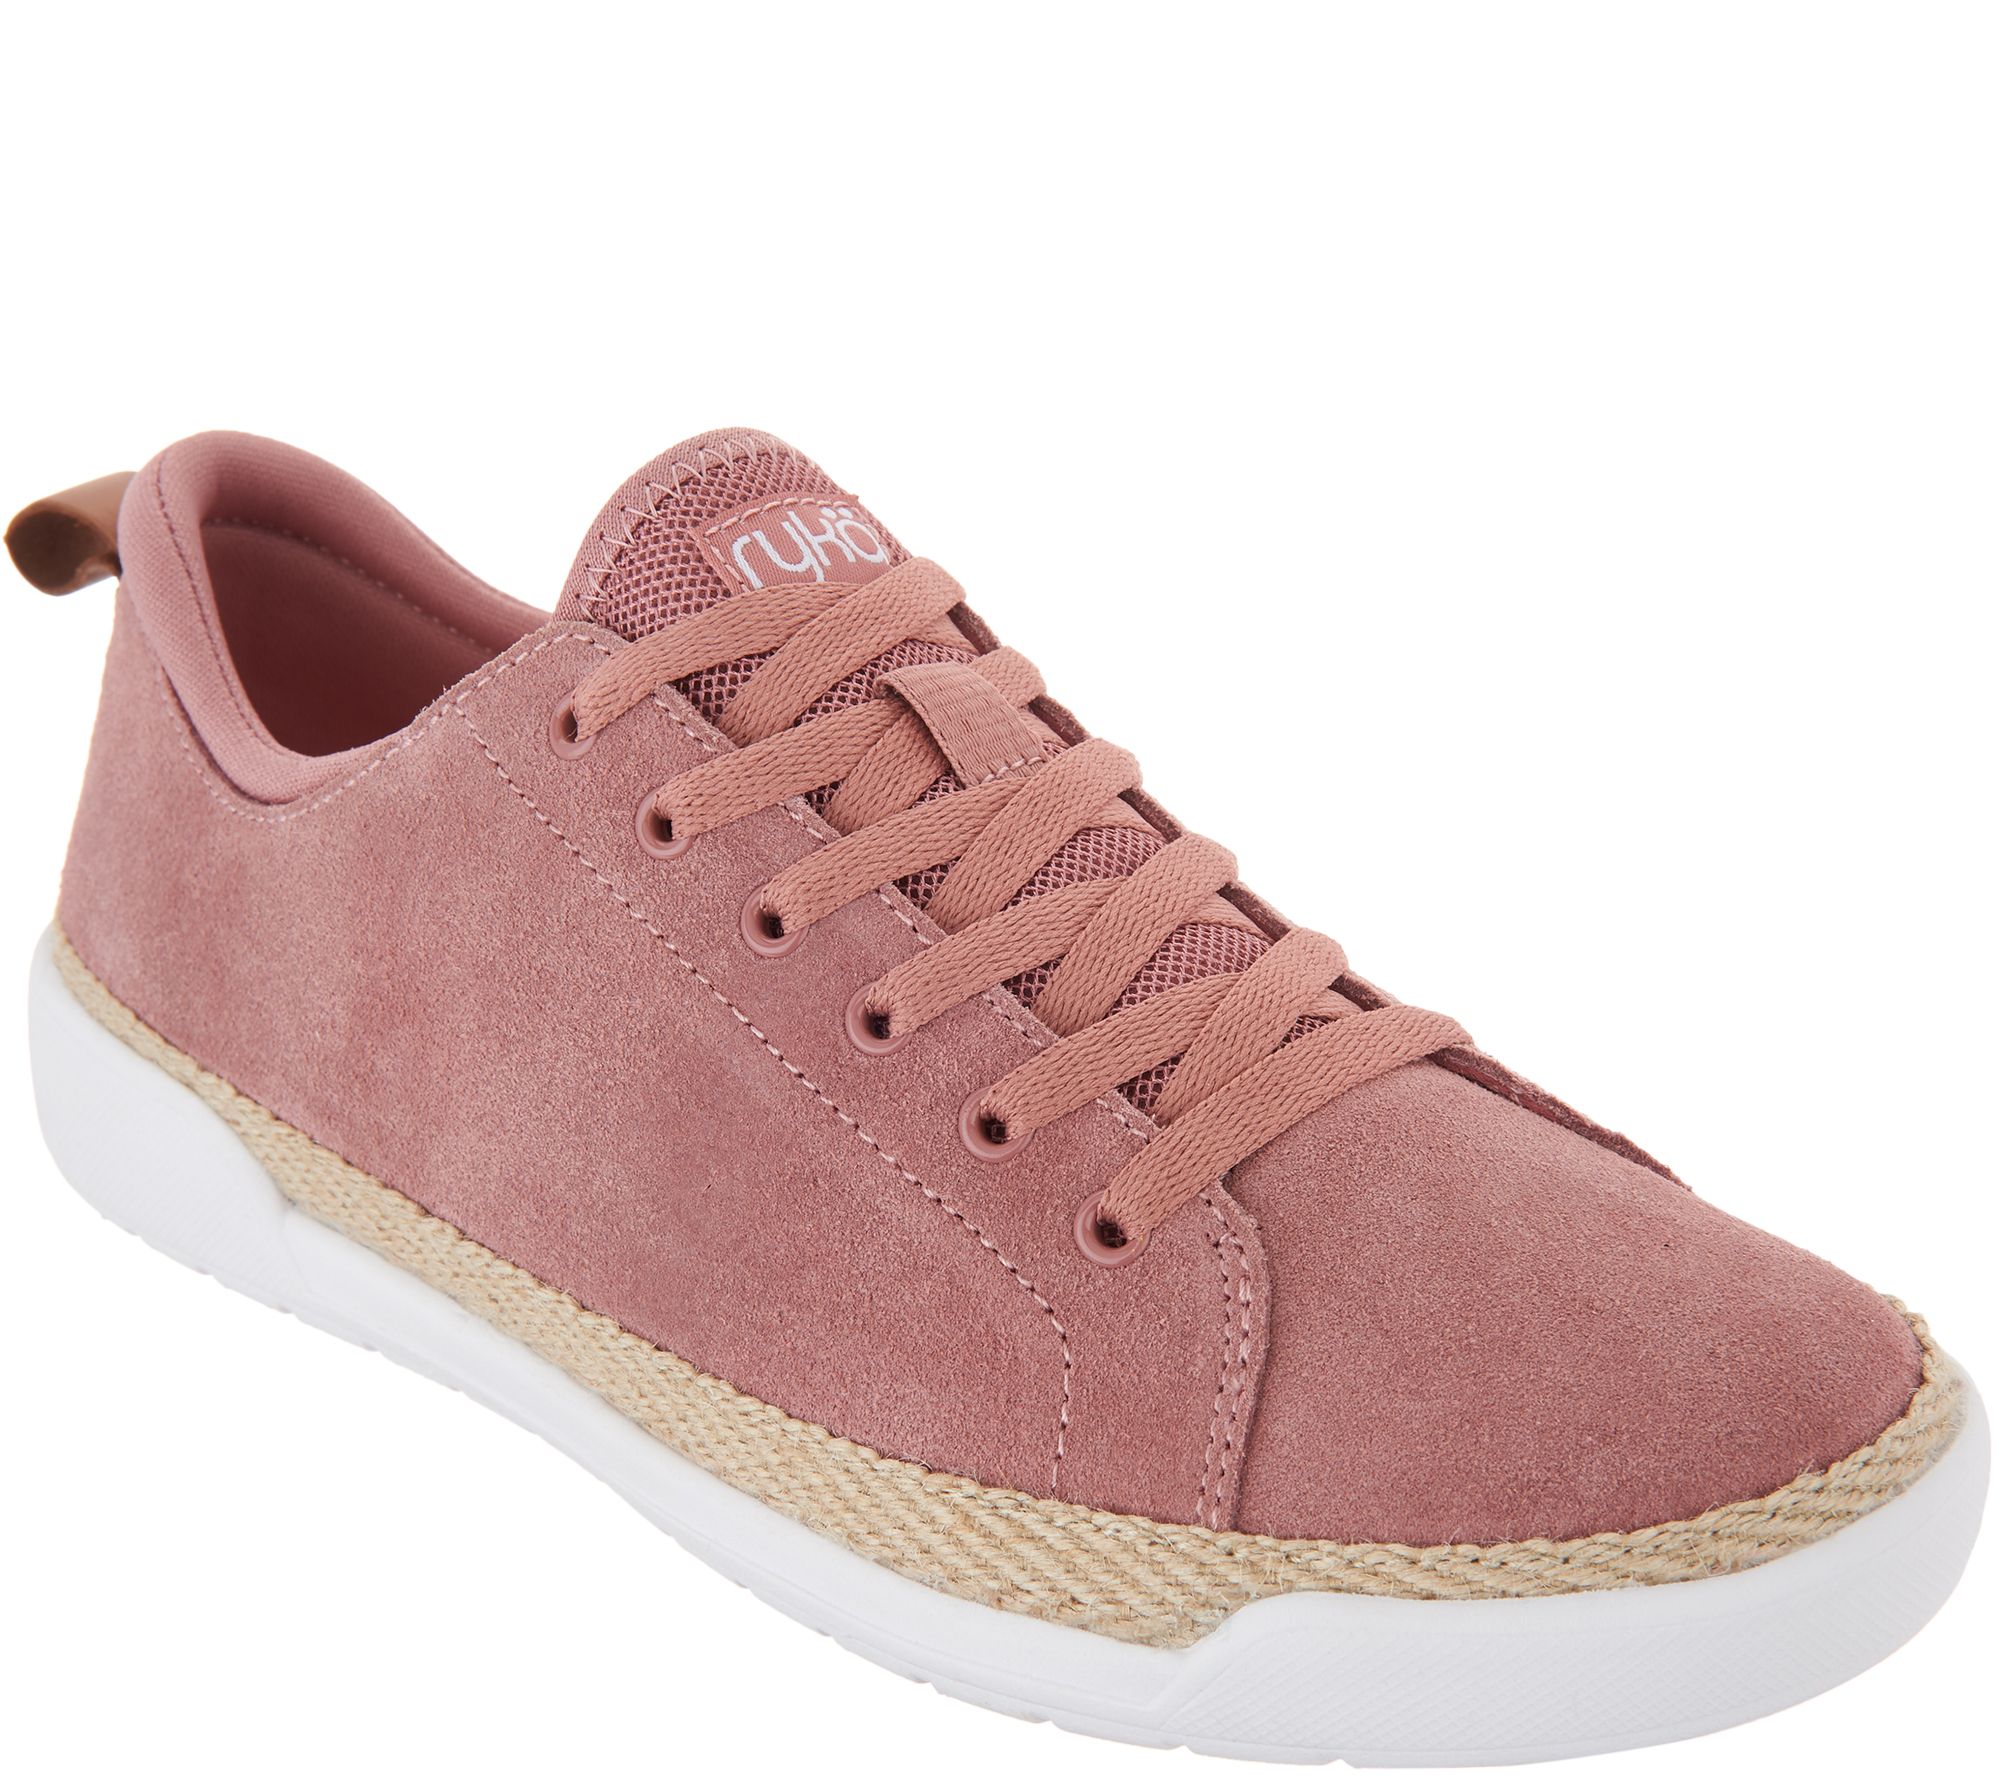 (QVC) Q2 Ryka Suede LaceUp Sneakers Olyssia